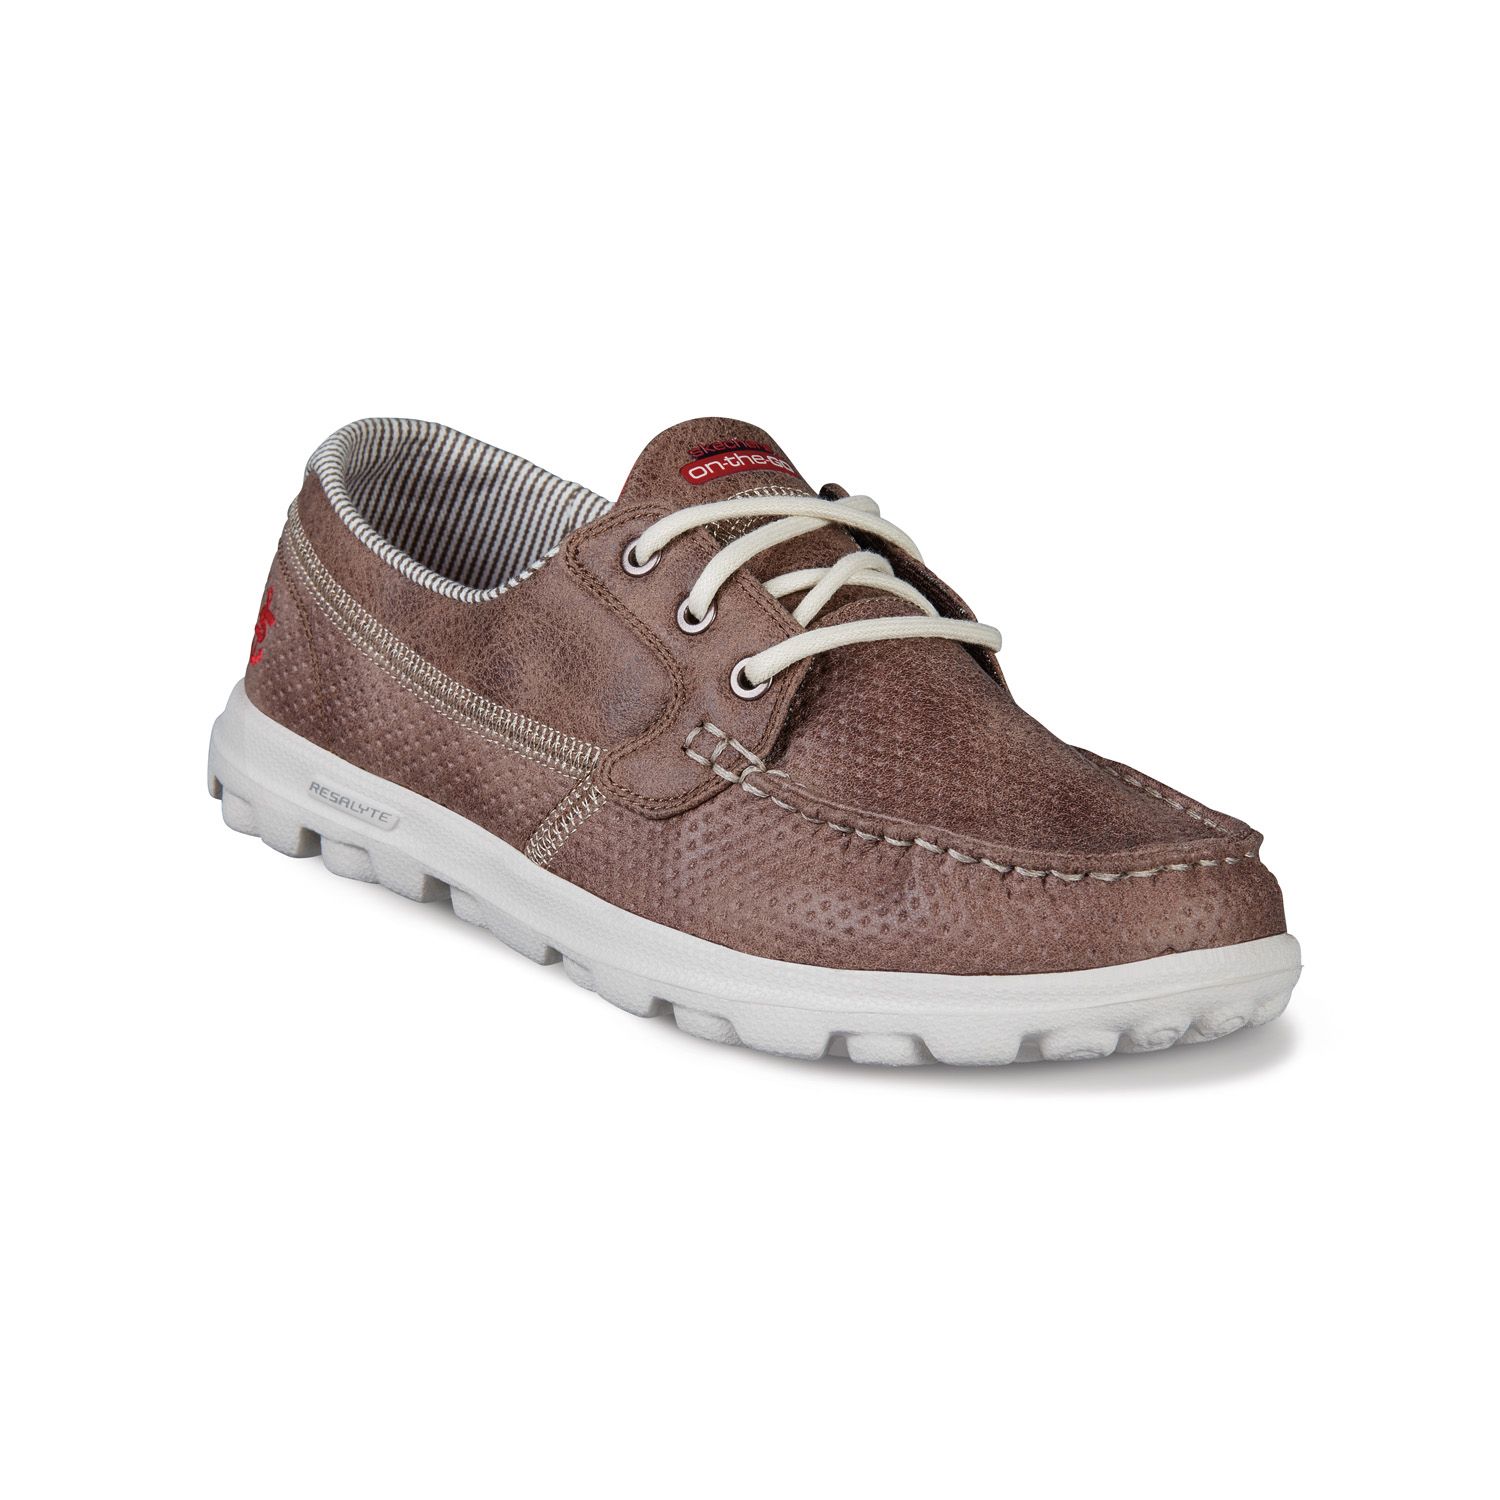 skechers on the go lace up lightweight boat shoes